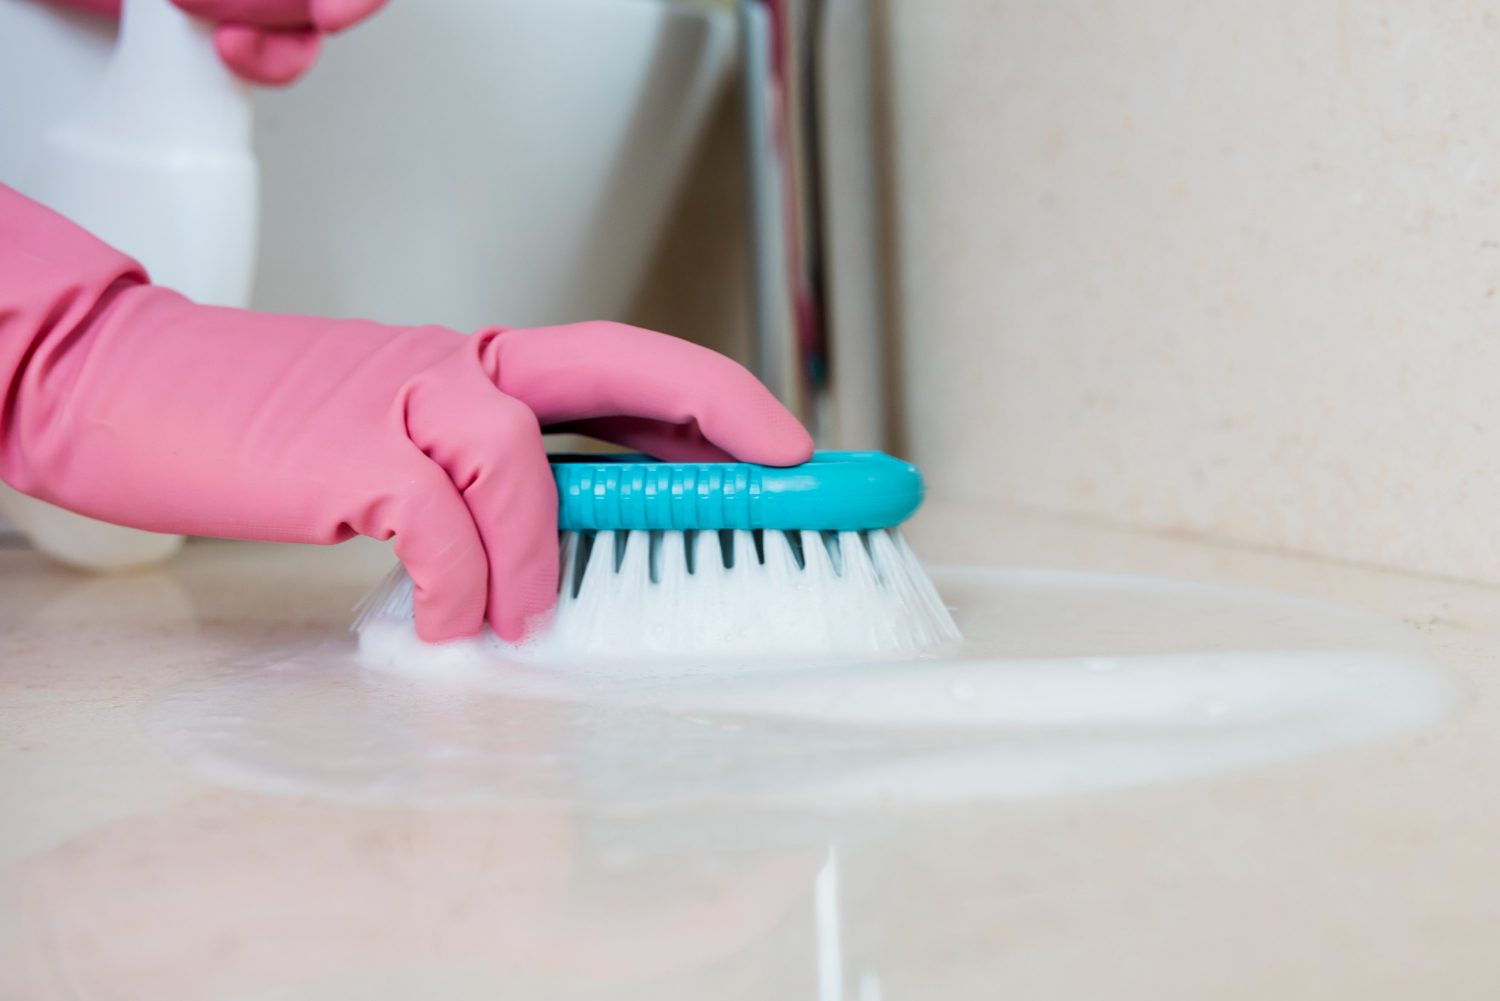 Why Choose Adelaide SuperMaids for Your Tile Cleaning Needs in Adelaide?